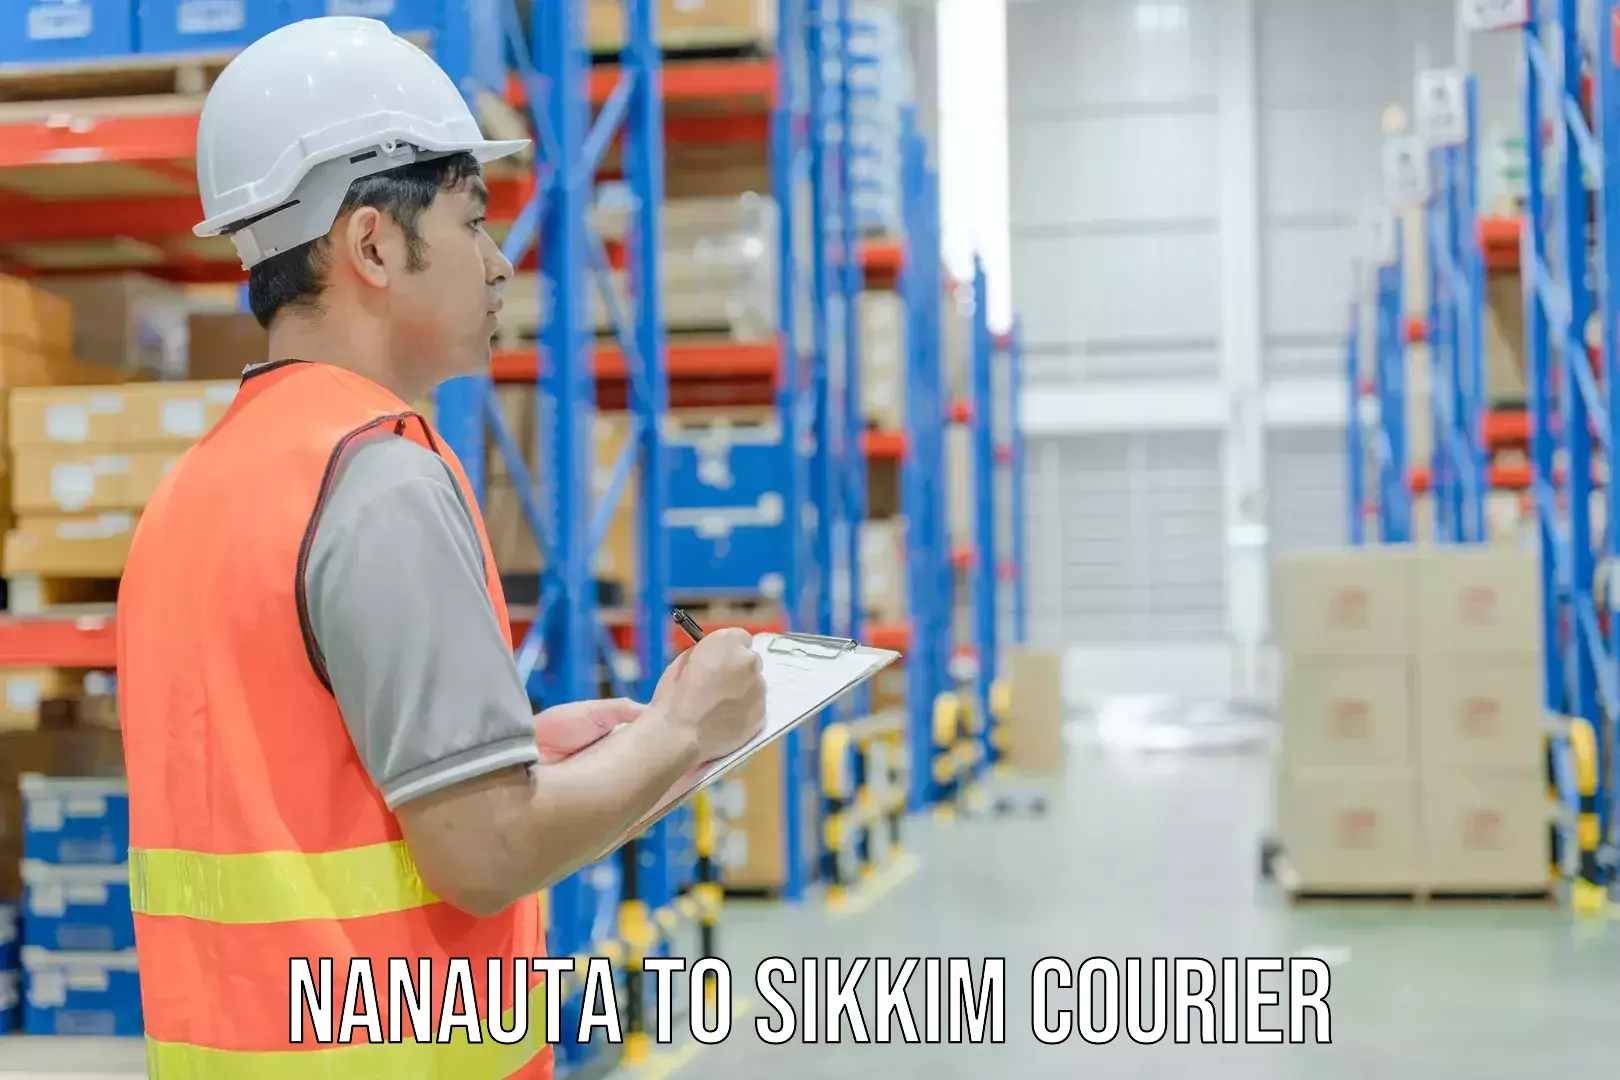 Courier service innovation Nanauta to East Sikkim